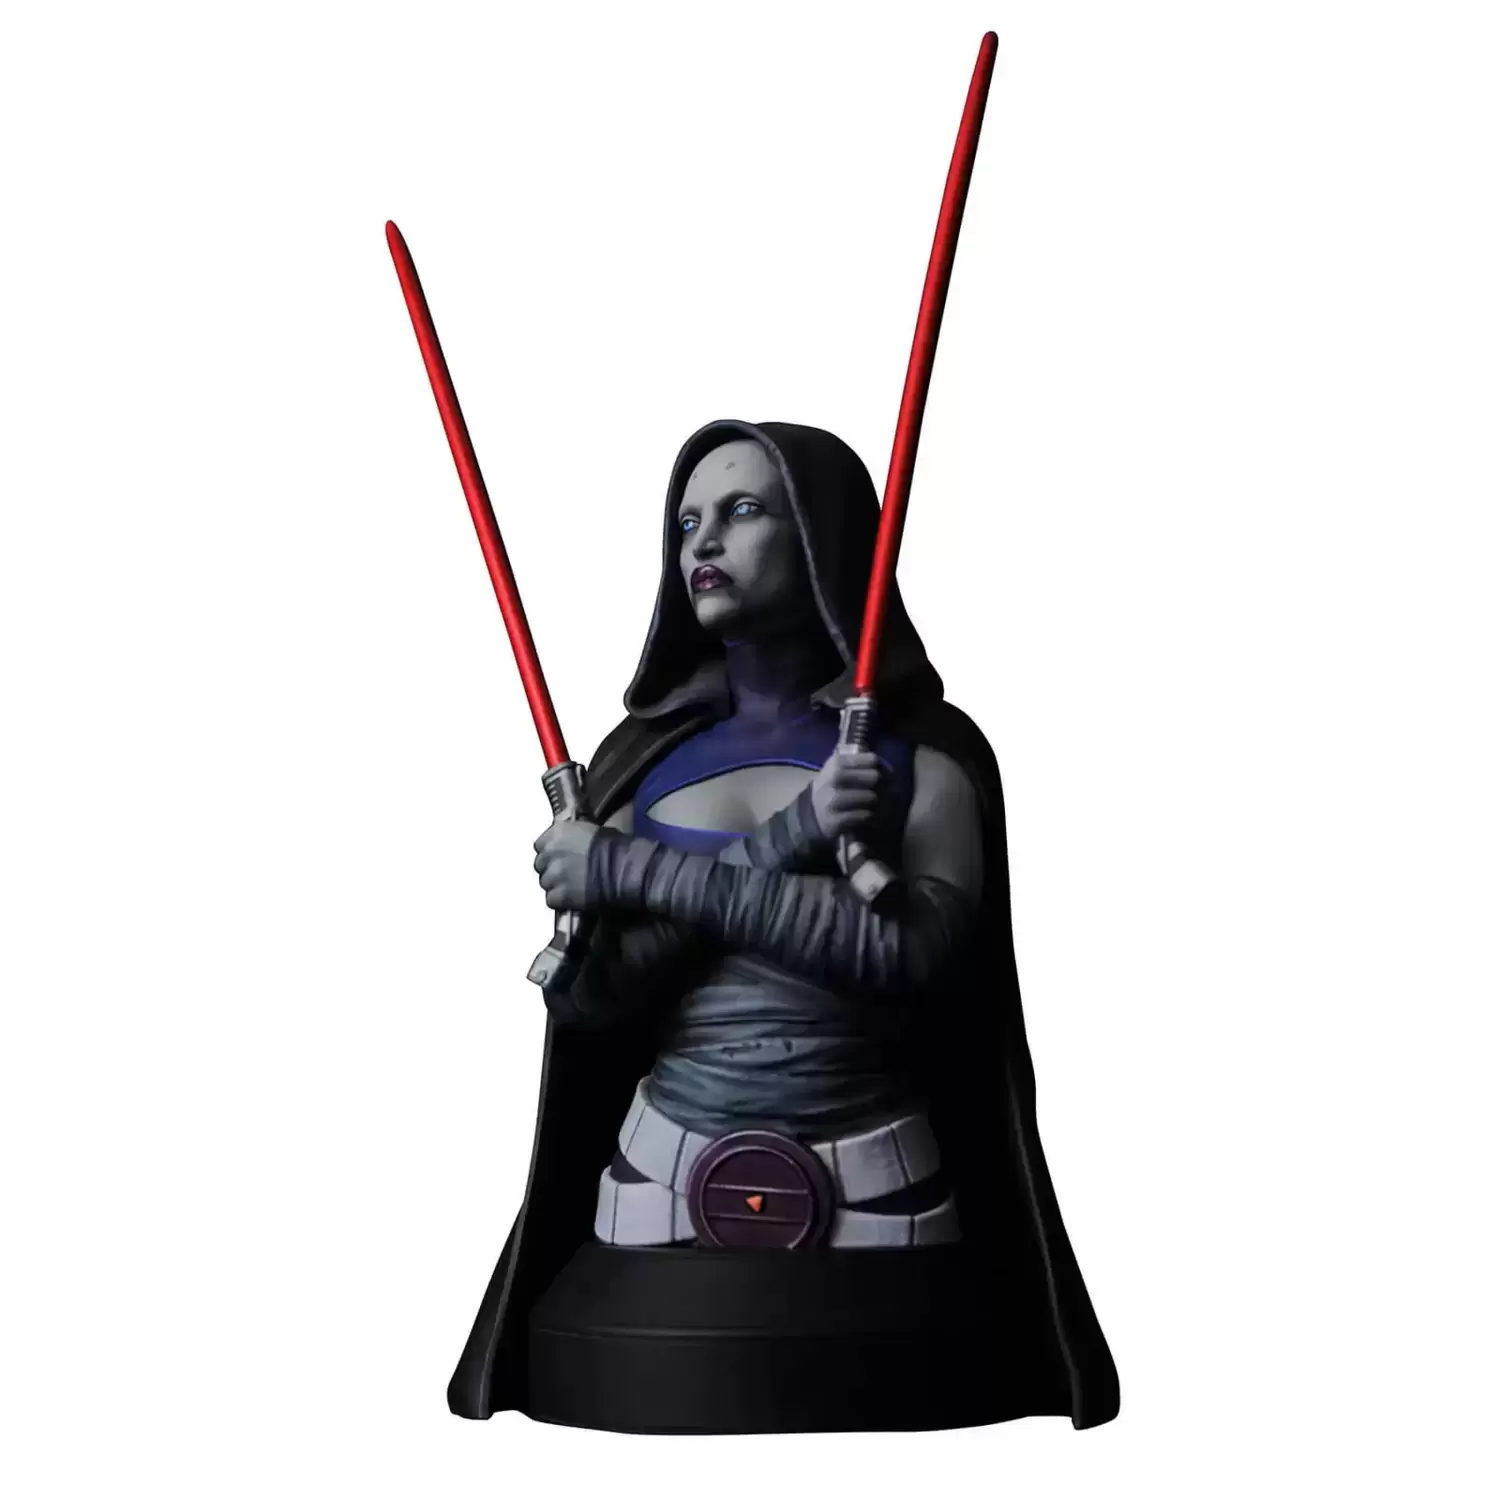 Gentle Giant Busts - Asajj Ventress - The Clone Wars Bust